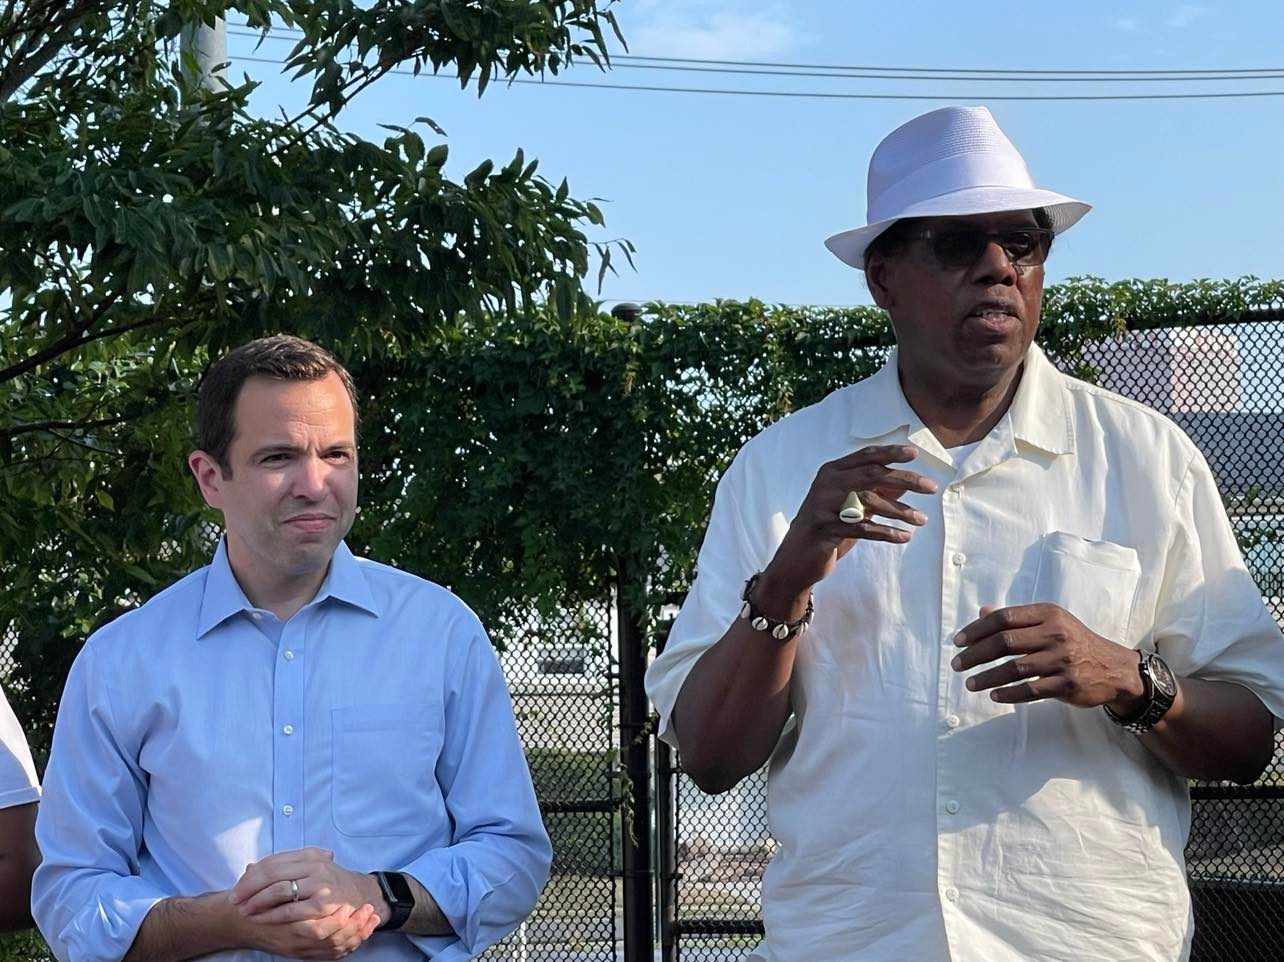 Acting Attorney General Matthew J. Platkin (Left) and National Association for the Advancement of Colored People Atlantic City Branch President Kaleem Shabazz (Right) address crowd at annual community walk.